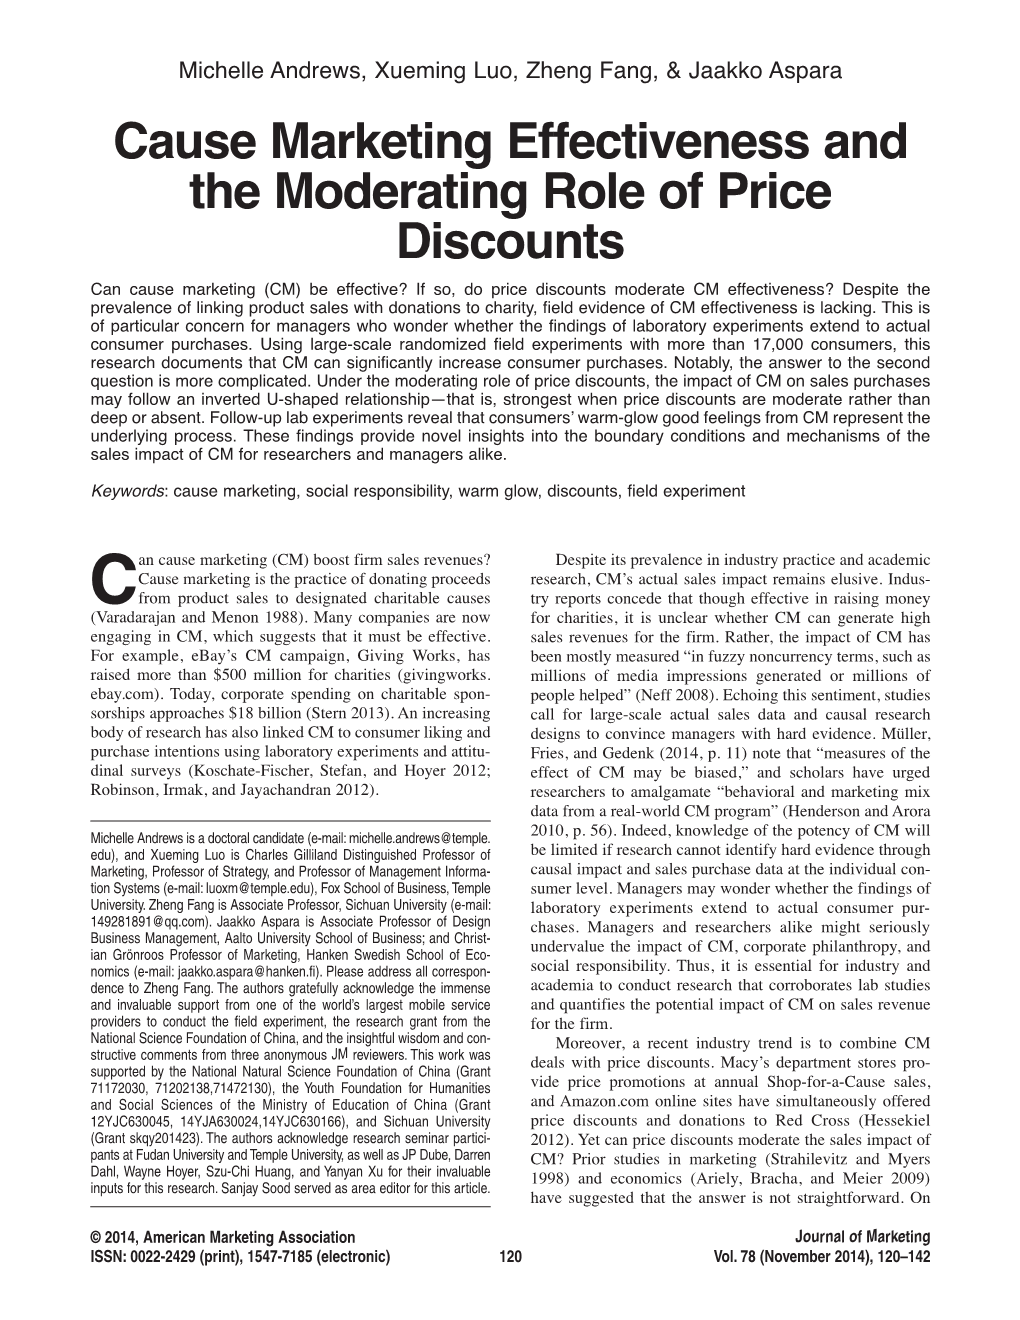 Cause Marketing Effectiveness and the Moderating Role of Price